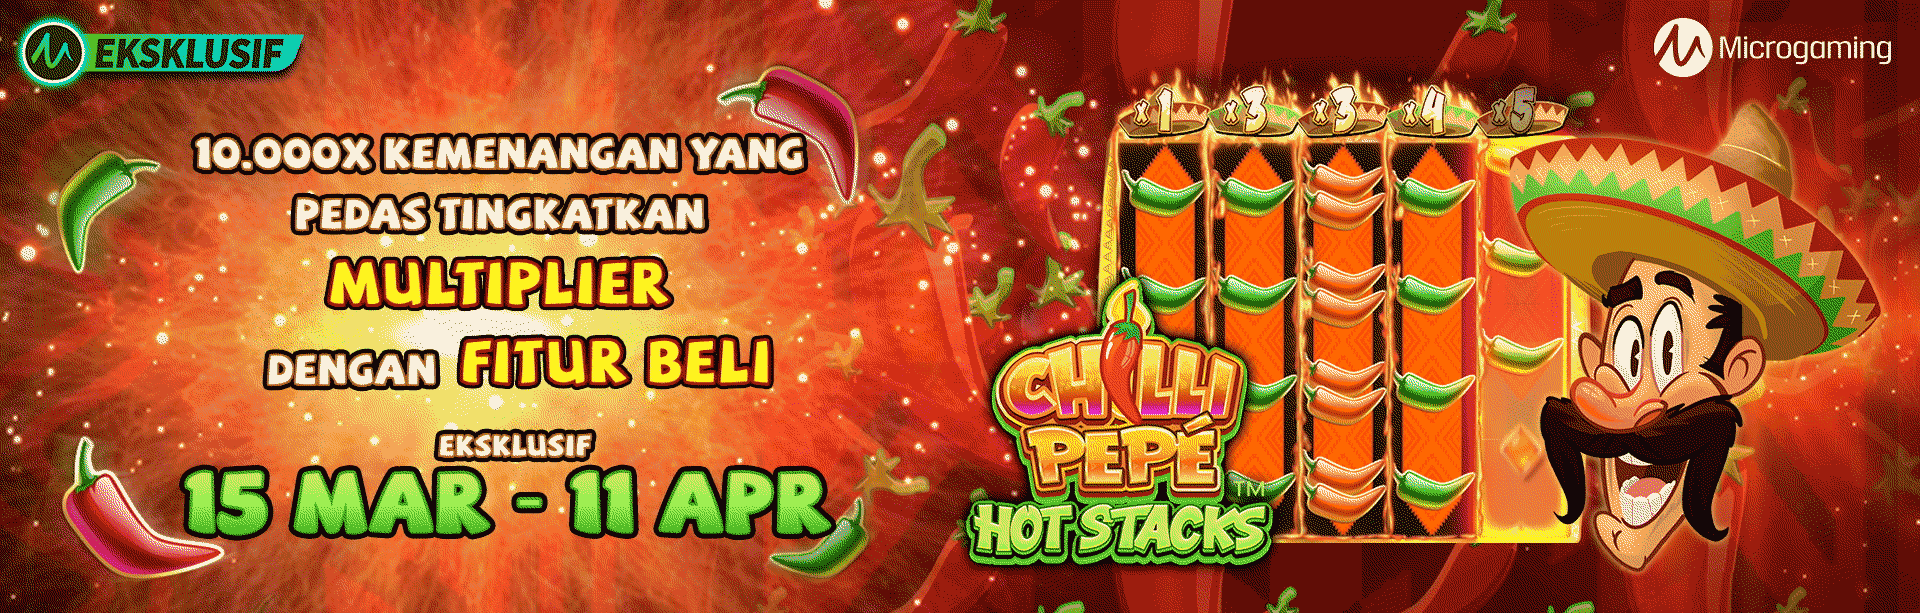 MG Exclusive Chilli Pepe Hot Stacks